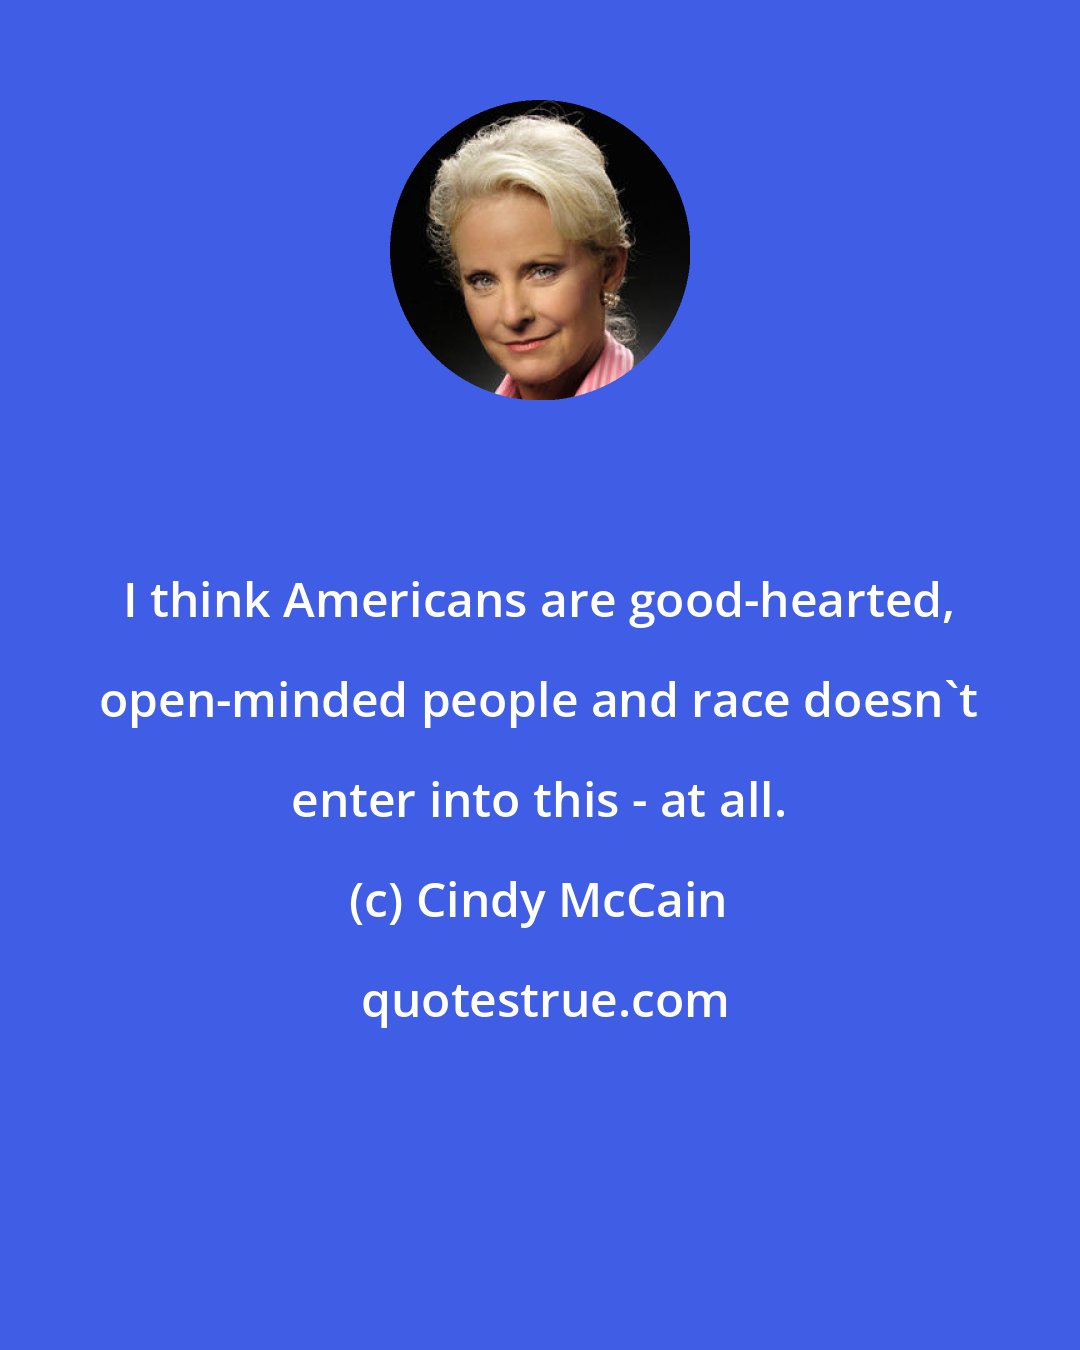 Cindy McCain: I think Americans are good-hearted, open-minded people and race doesn't enter into this - at all.